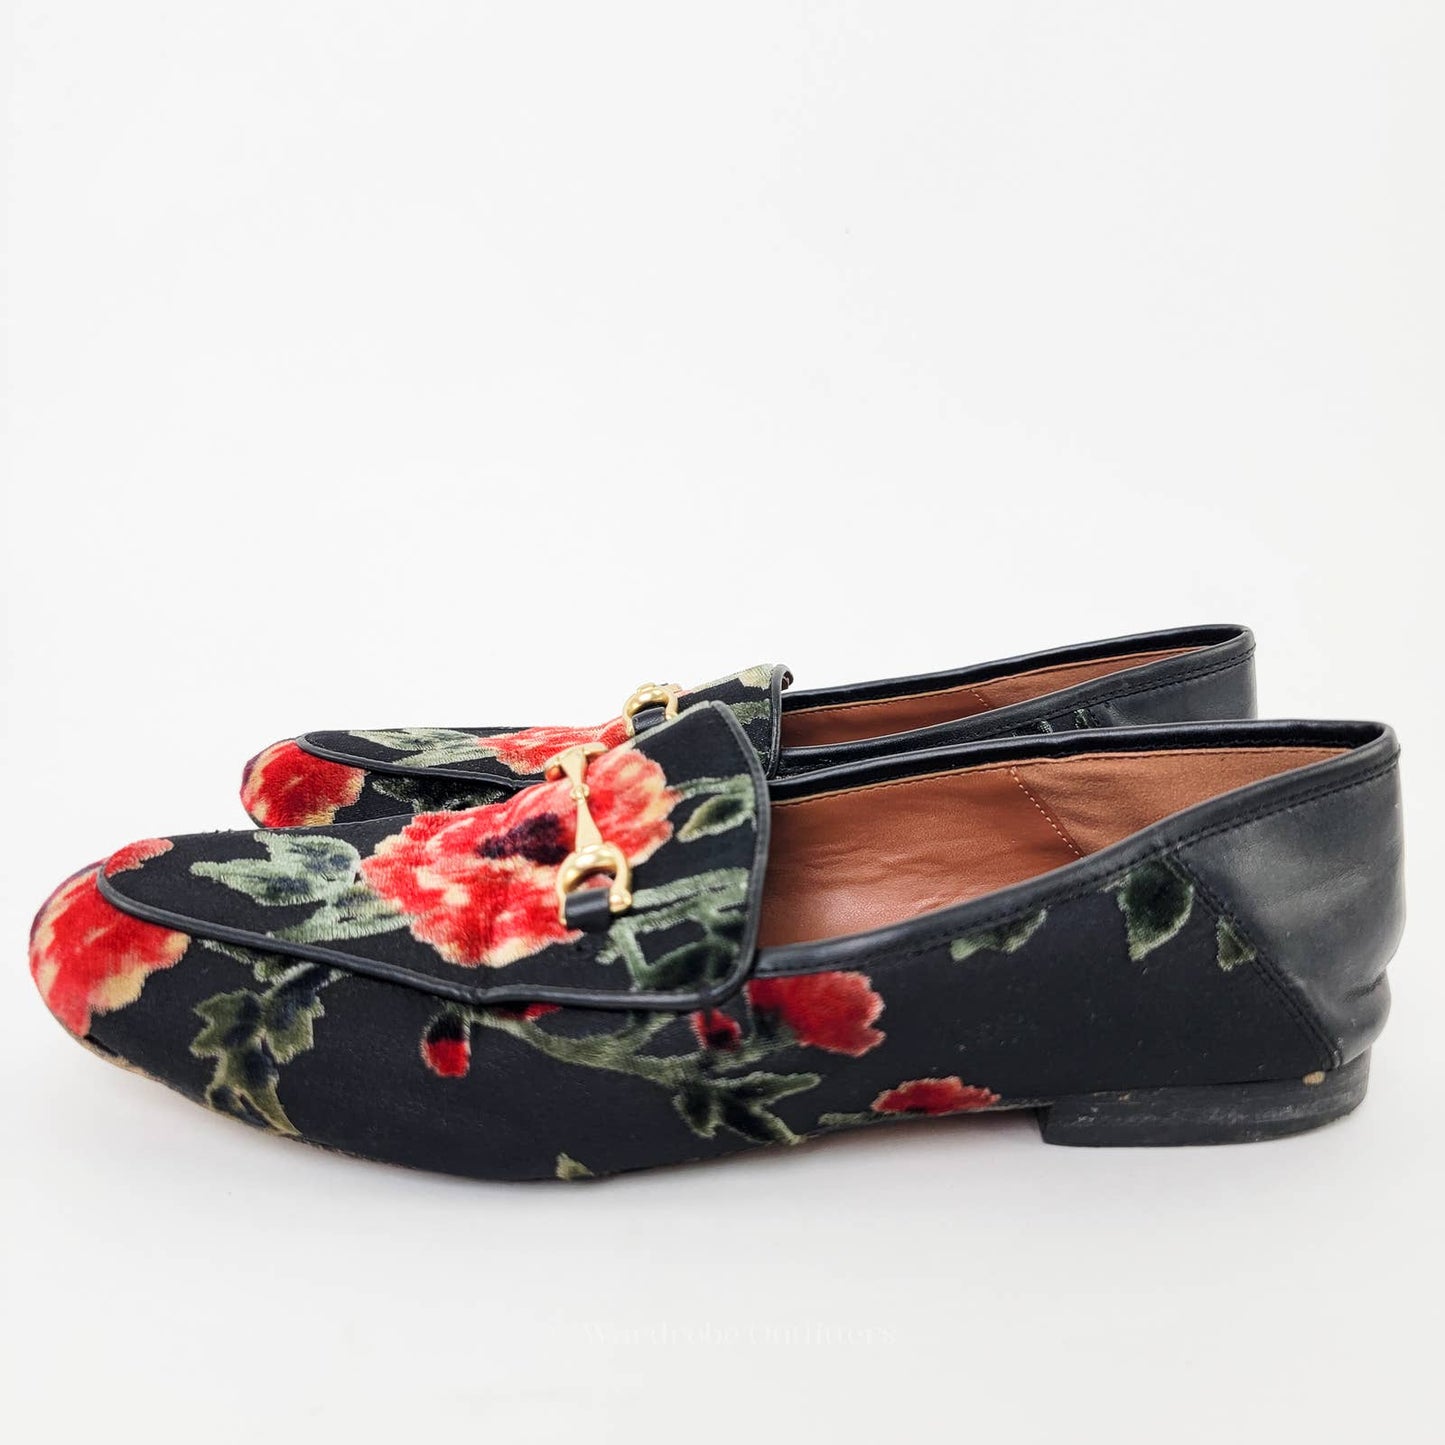 Coach Haley Floral Jacquard Slip On Loafers - 7.5